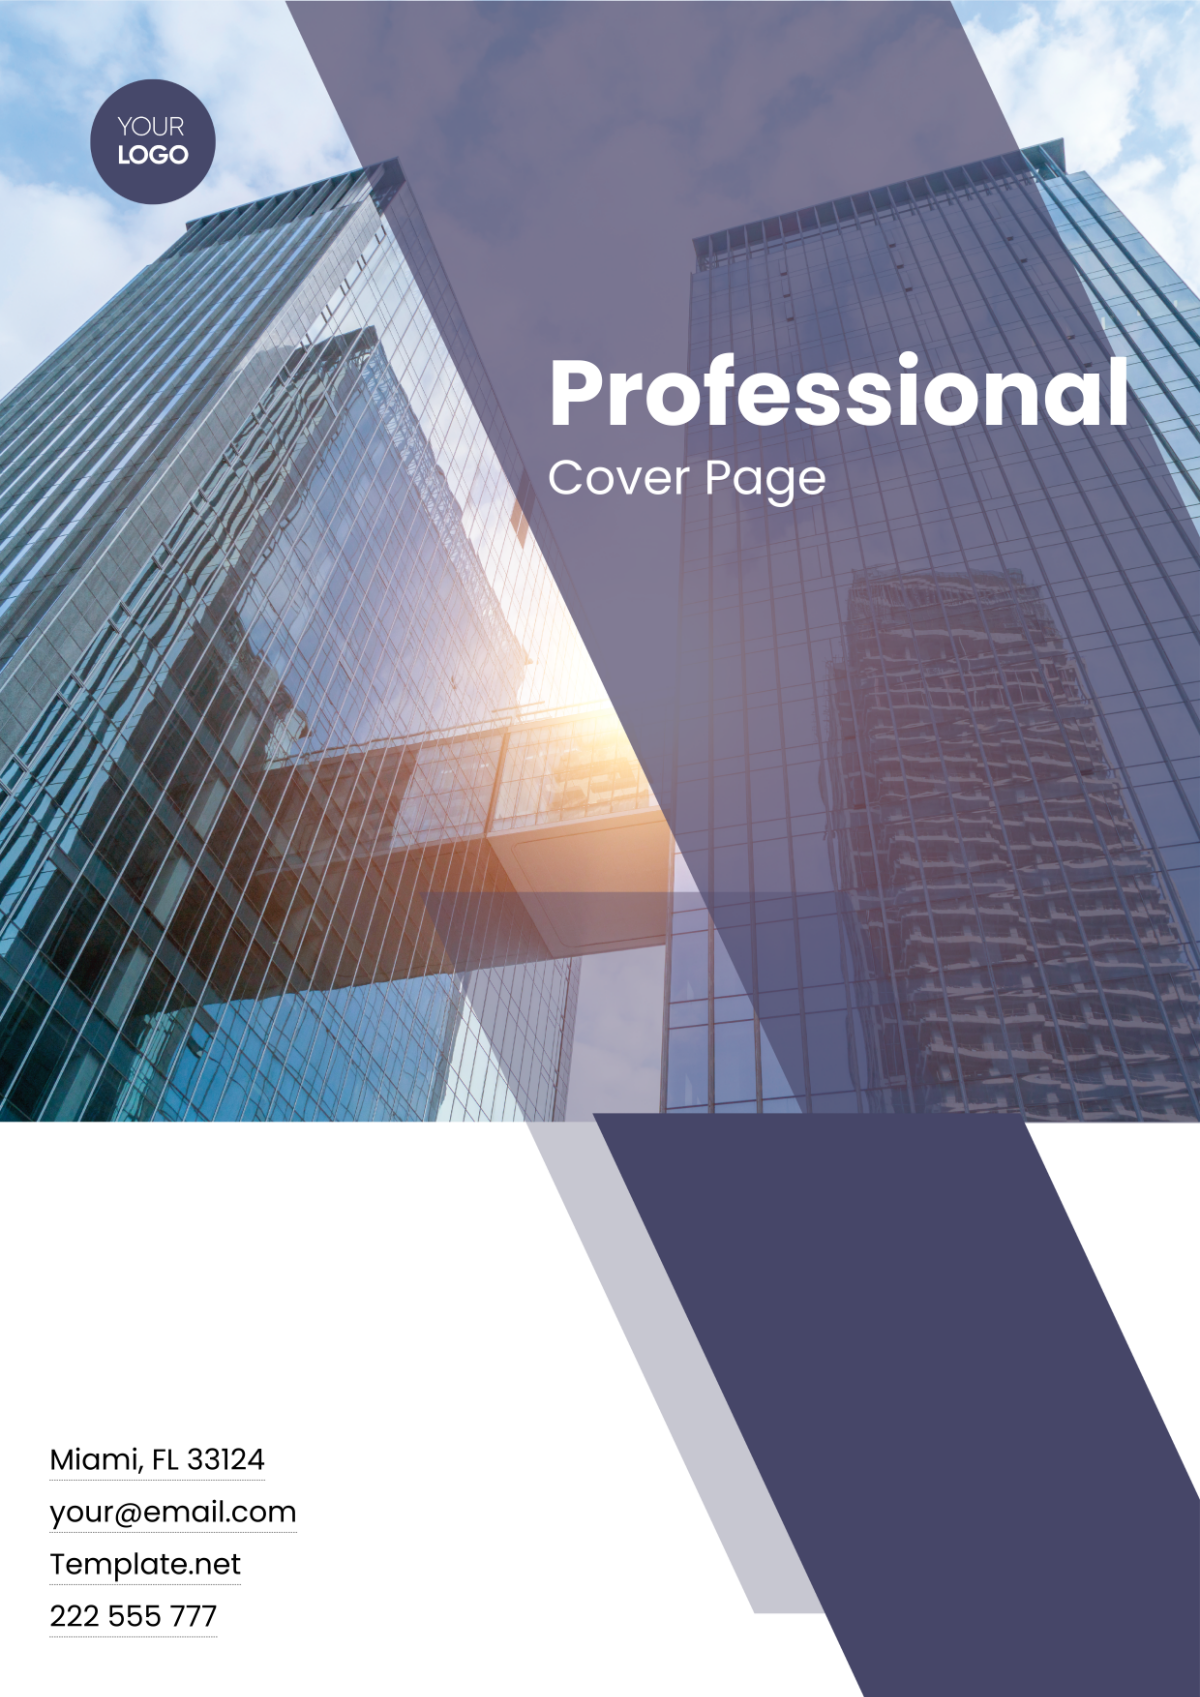 Professional Cover Page